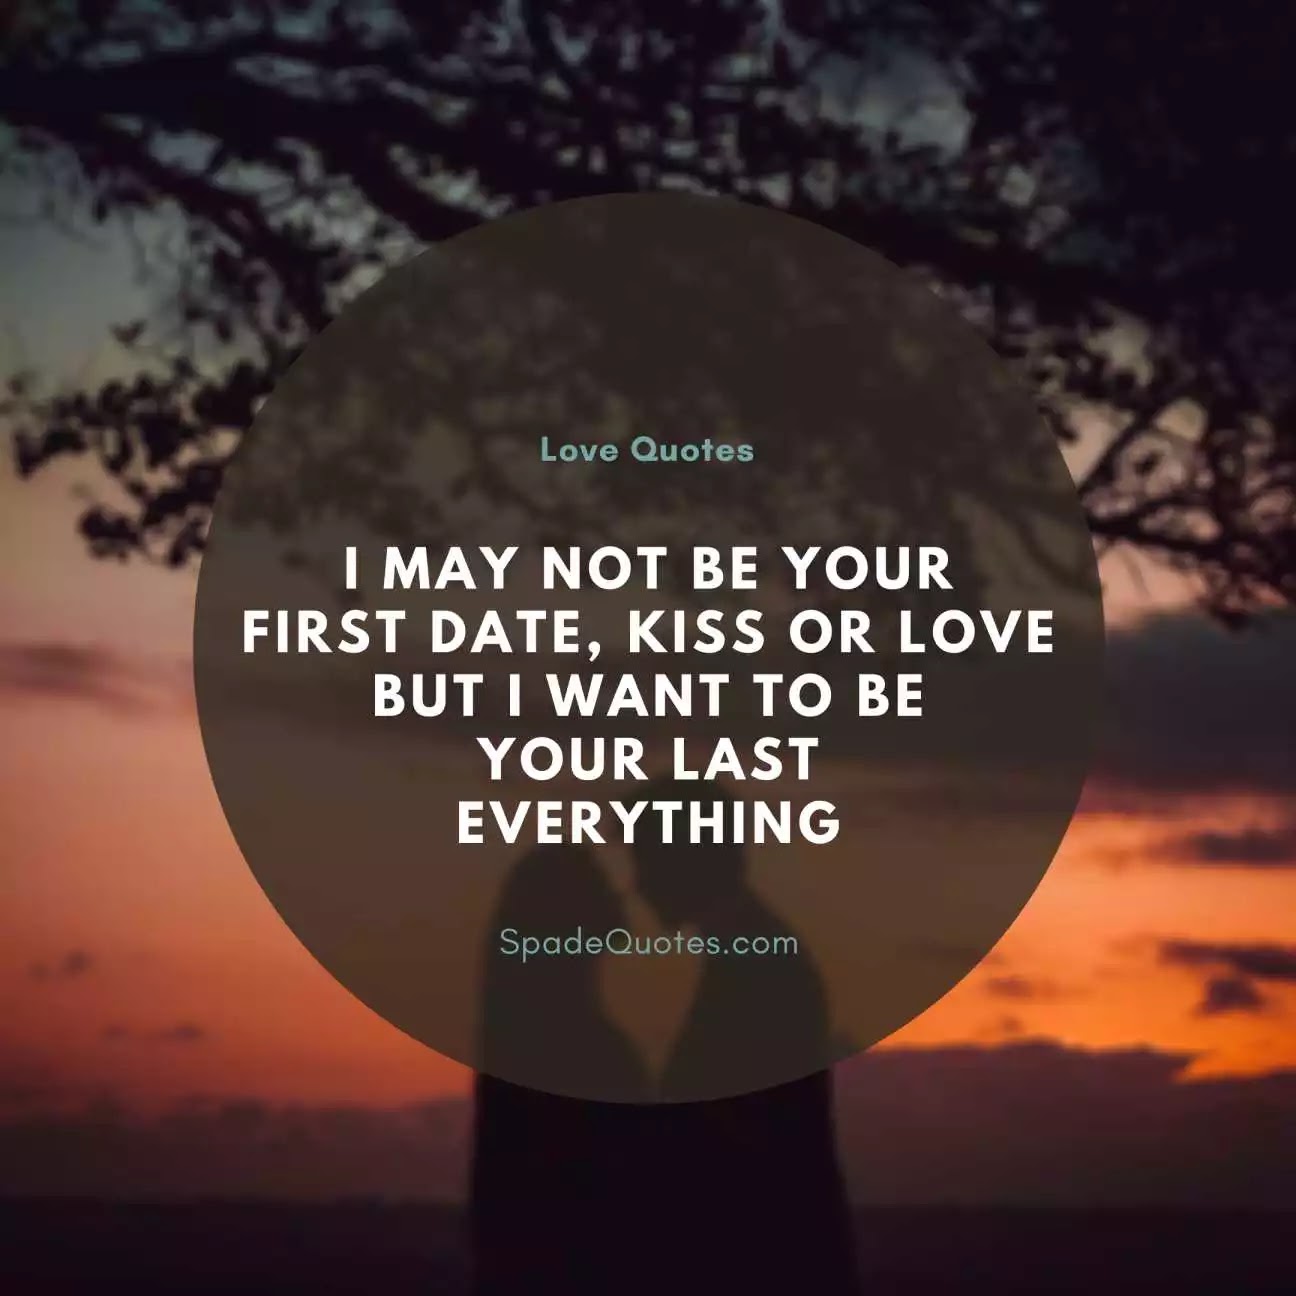 Unconditional-love-quotes-for-her-second-love-captions-spadequotes